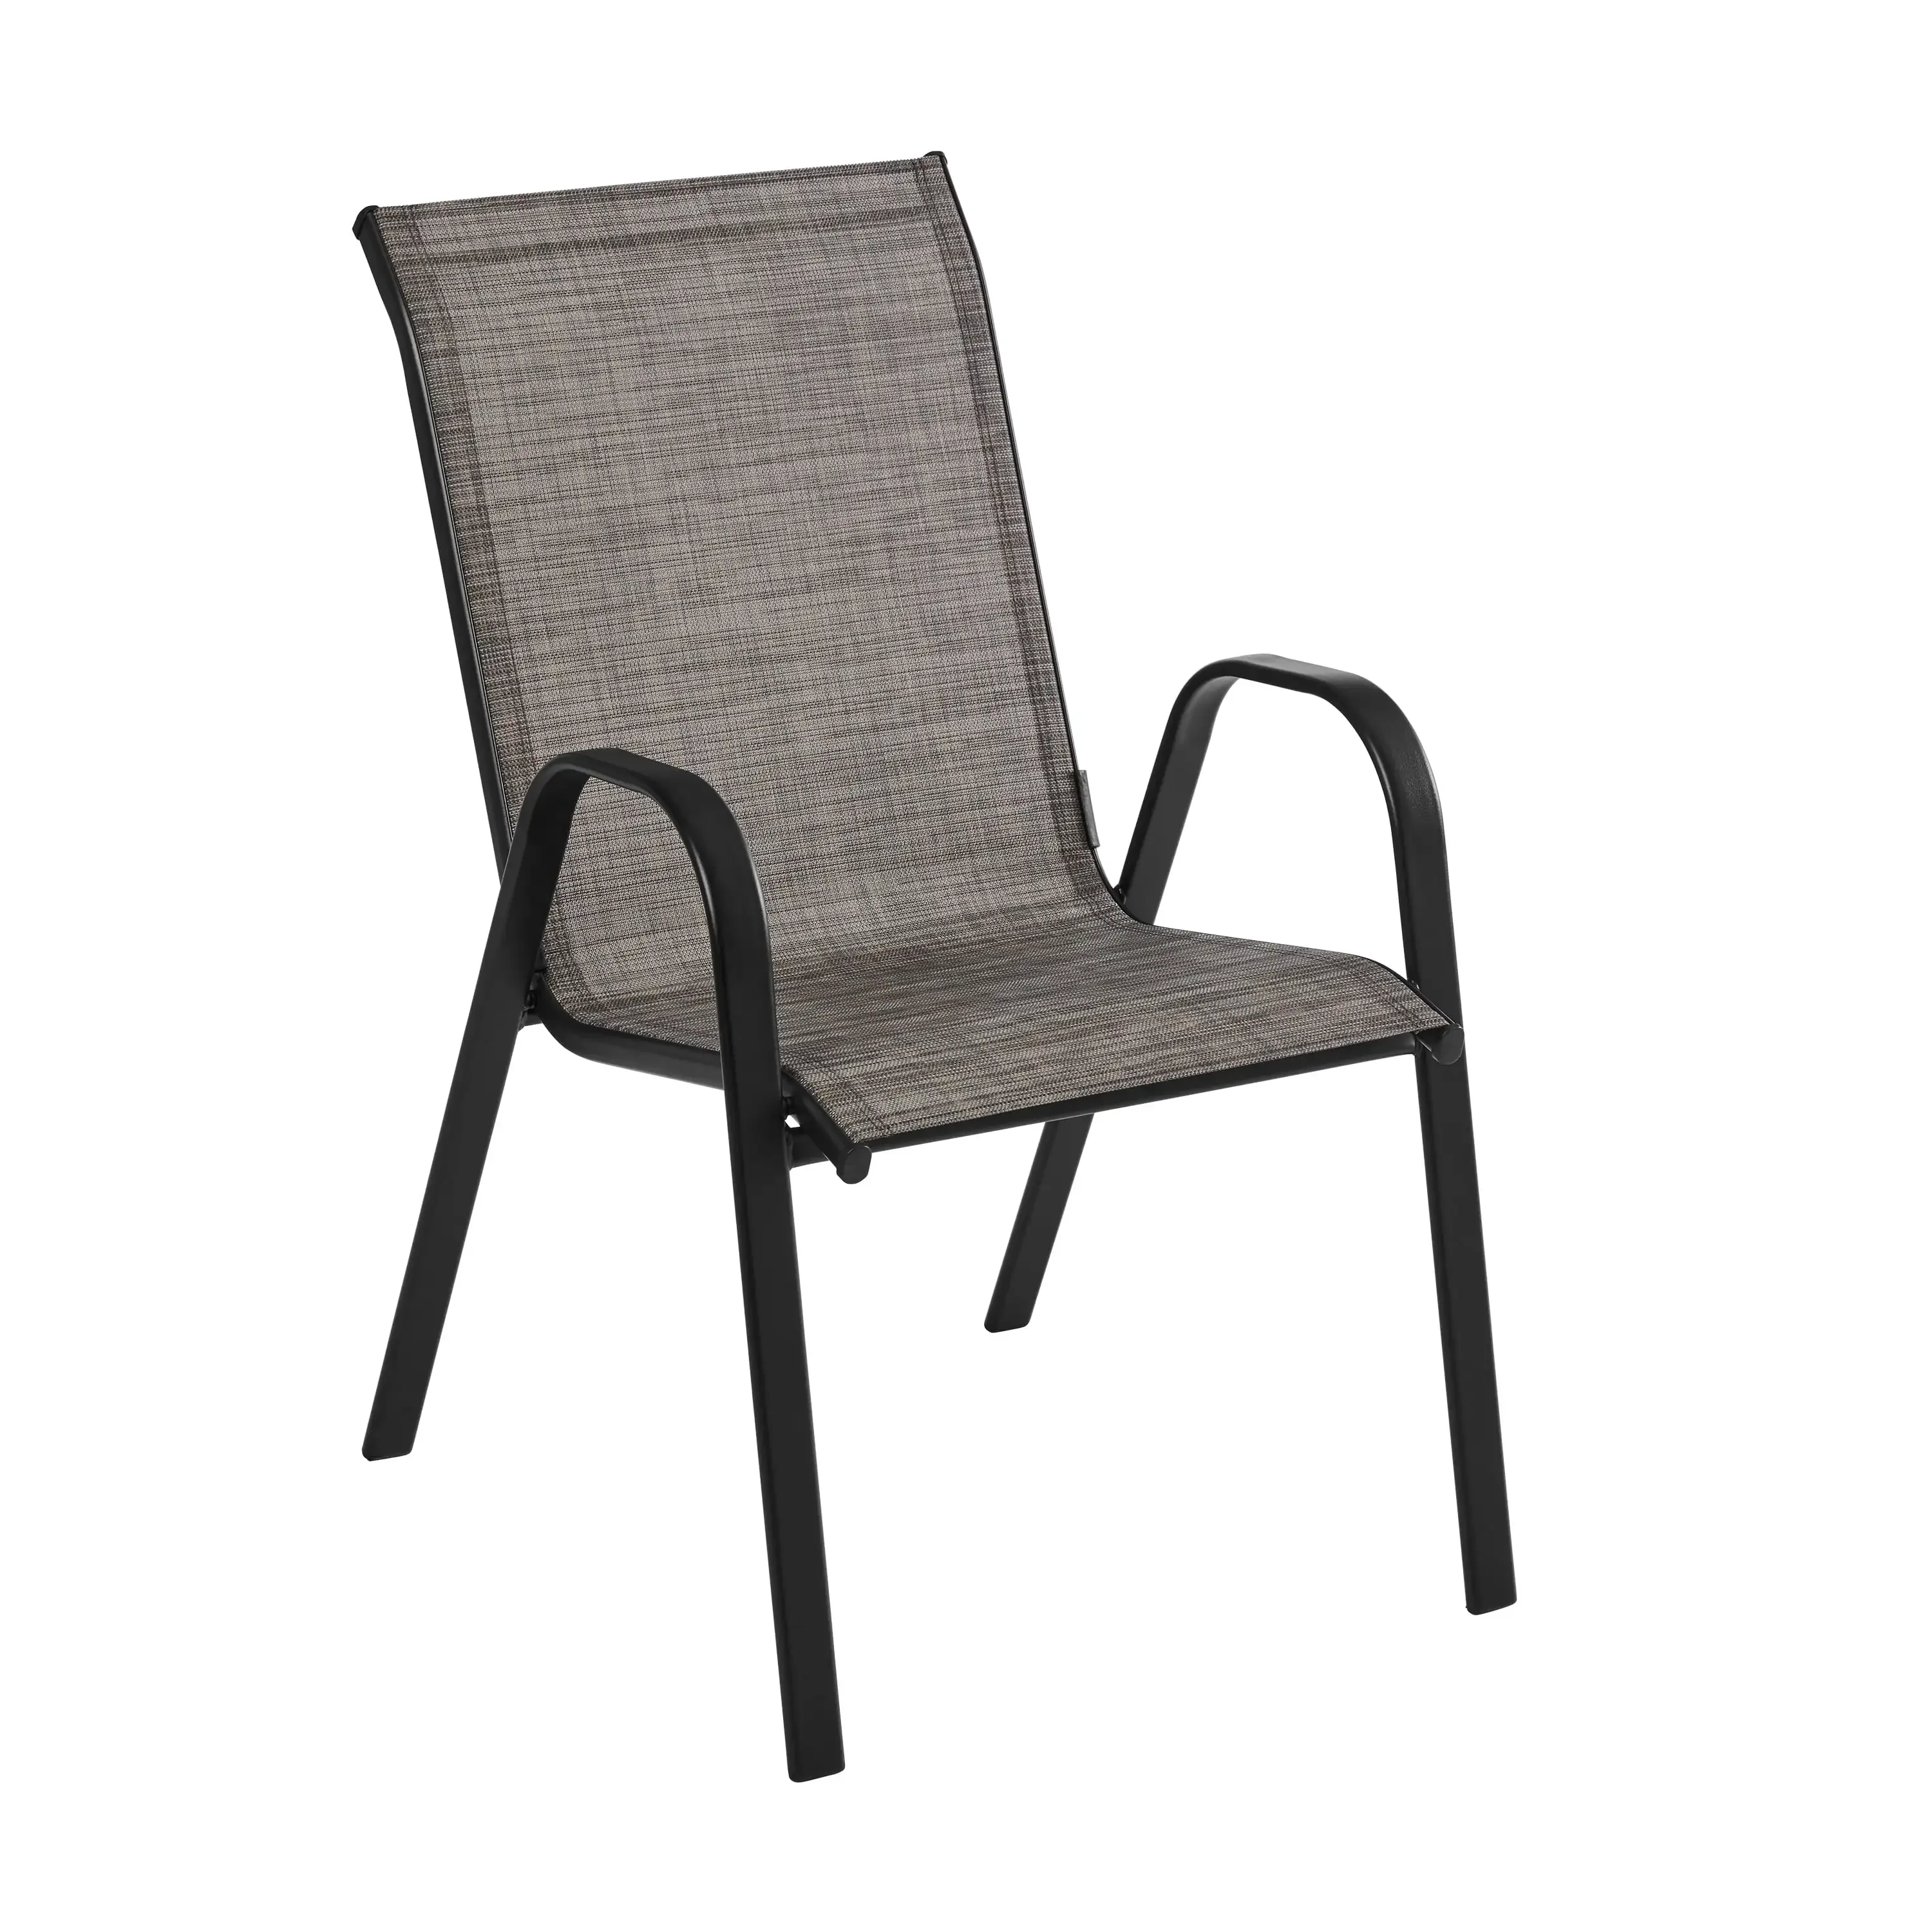 

patio furniture Heritage Park Steel Stacking Chair (1 Pack), Grey